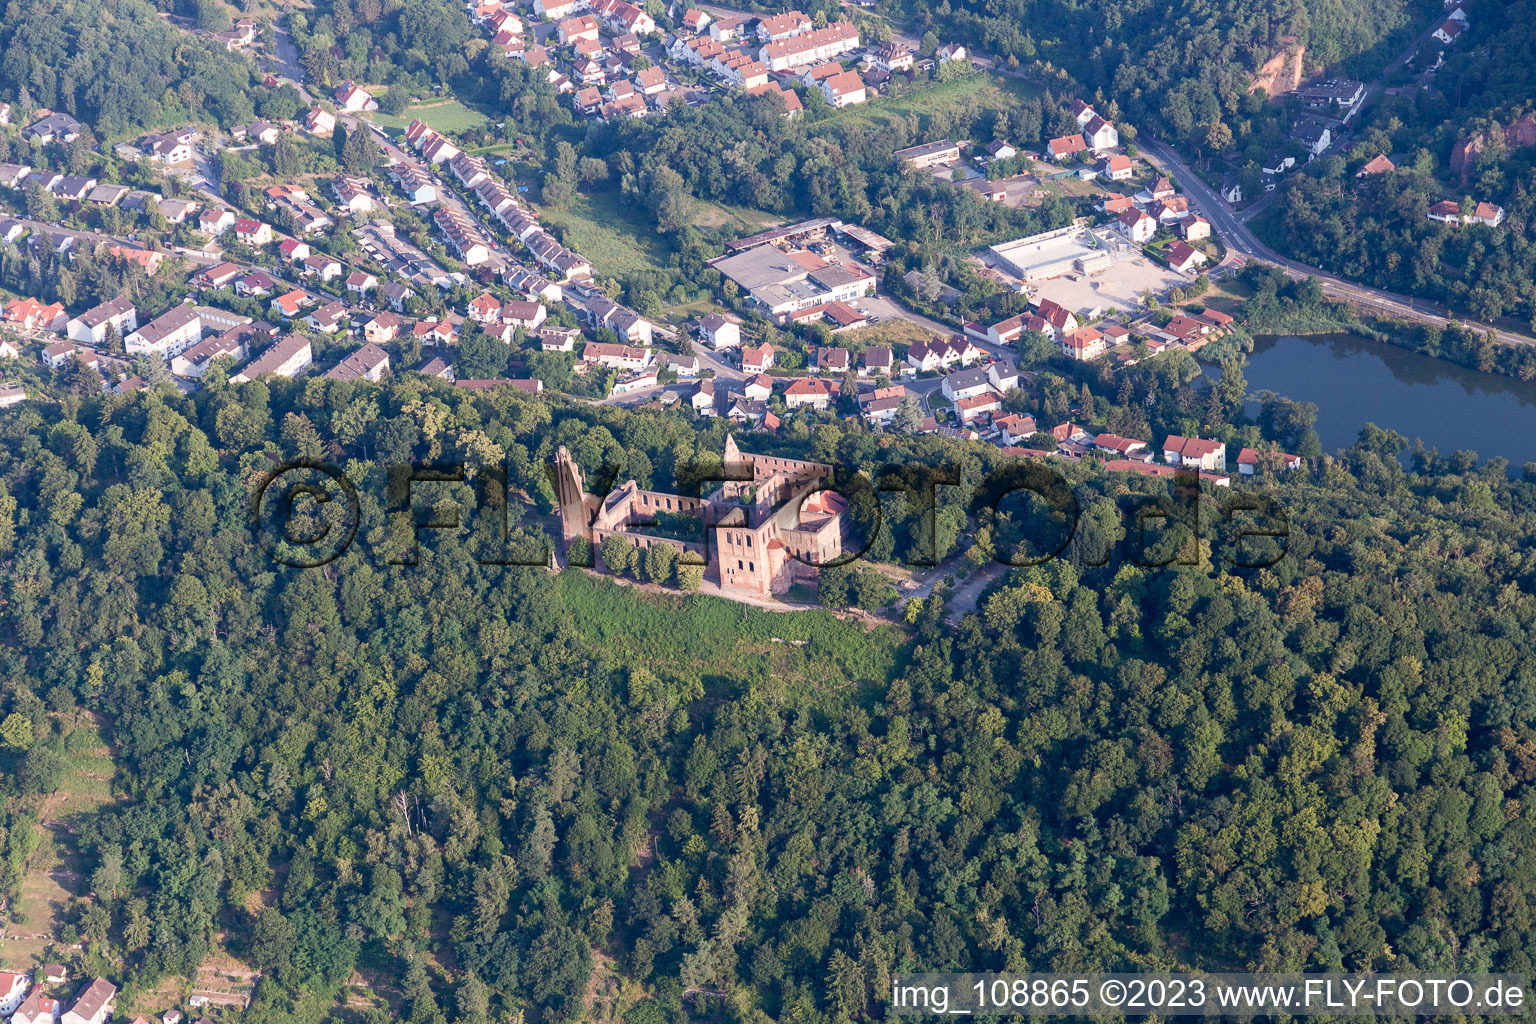 Aerial photograpy of Limburg Monastery in the district Grethen in Bad Dürkheim in the state Rhineland-Palatinate, Germany